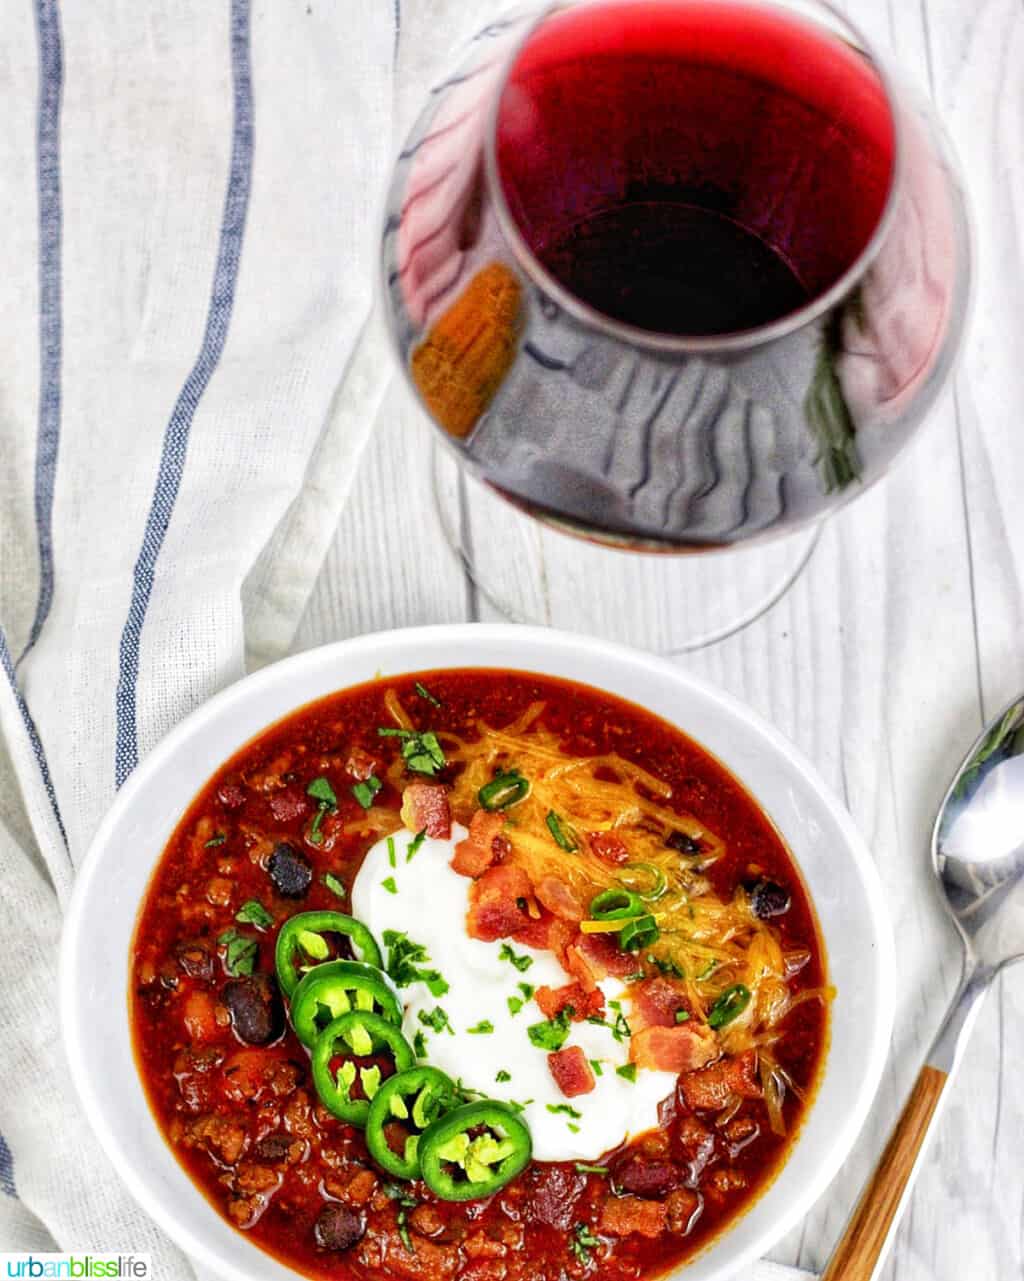 bowl of chili with glass of red wine